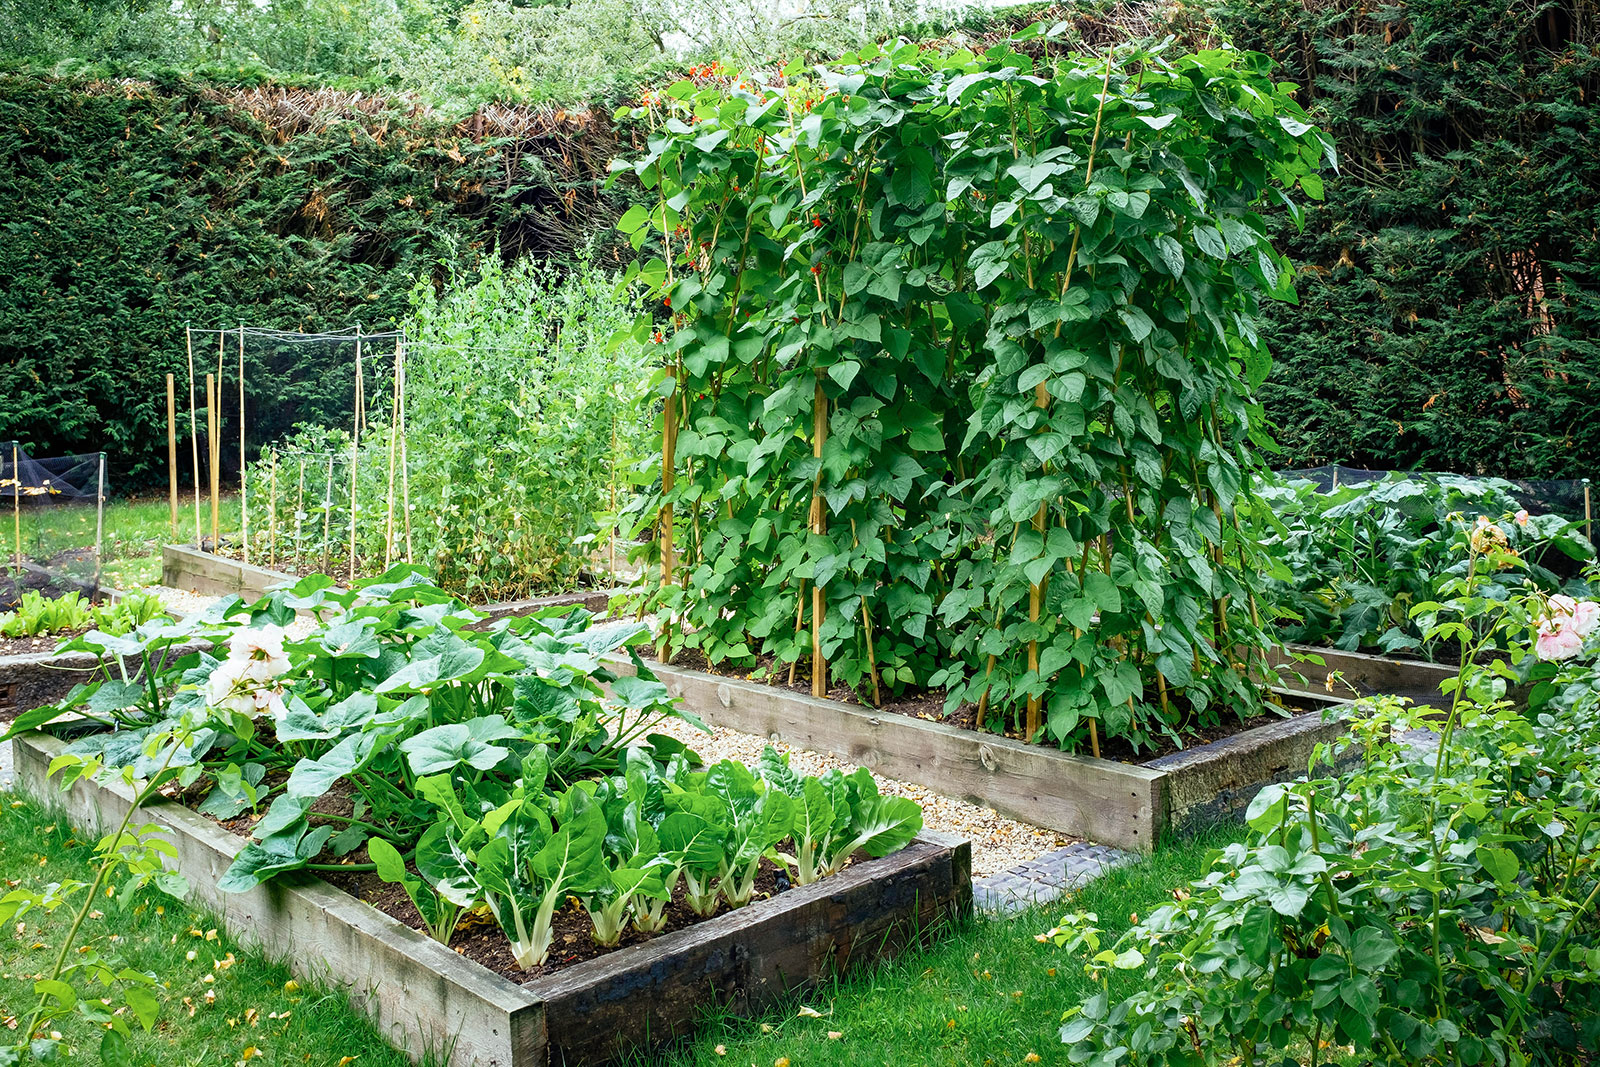 Vegetable garden planted intensively in raised beds